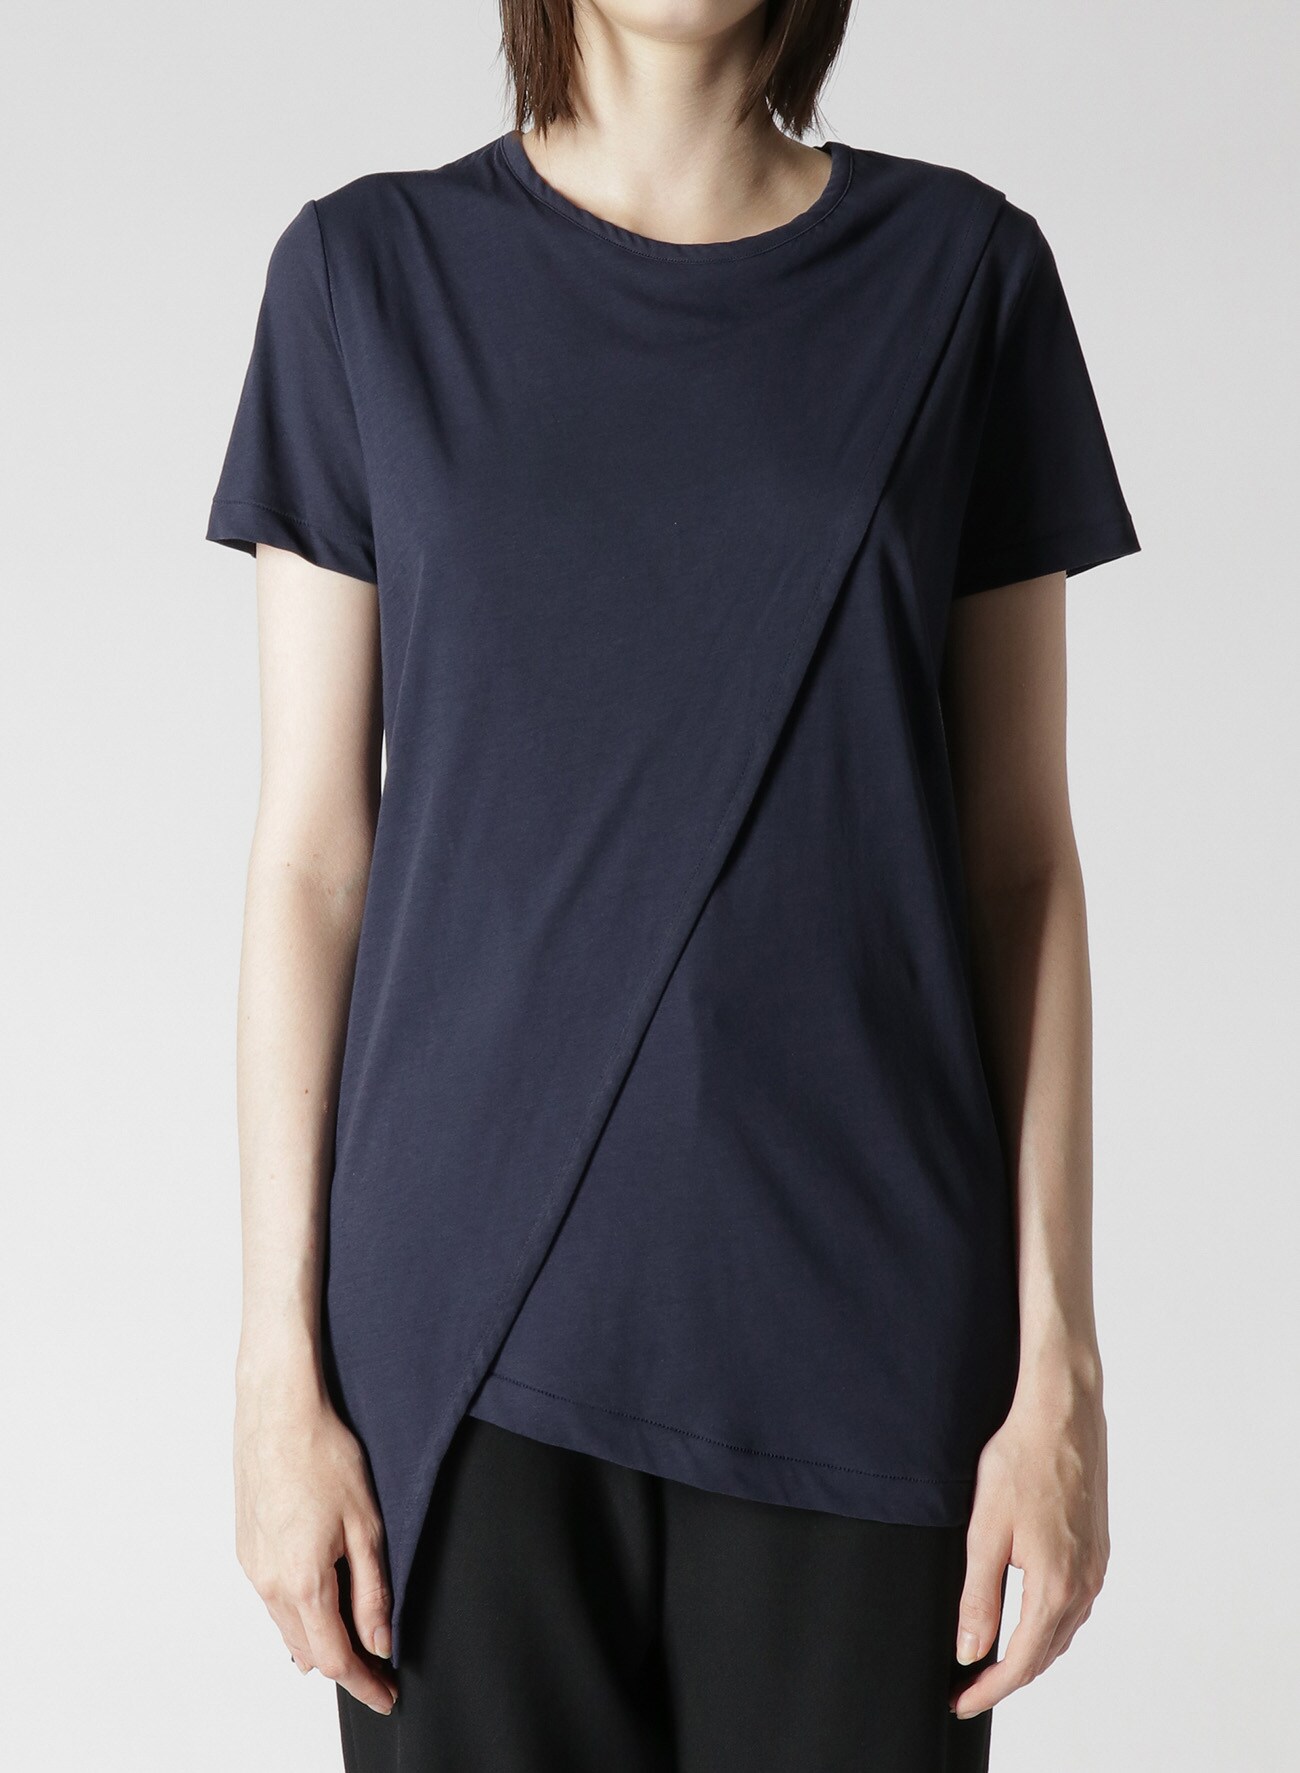 SINGLE JERSEY T-SHIRT WITH DIAGONAL OVERLAPPING PANEL